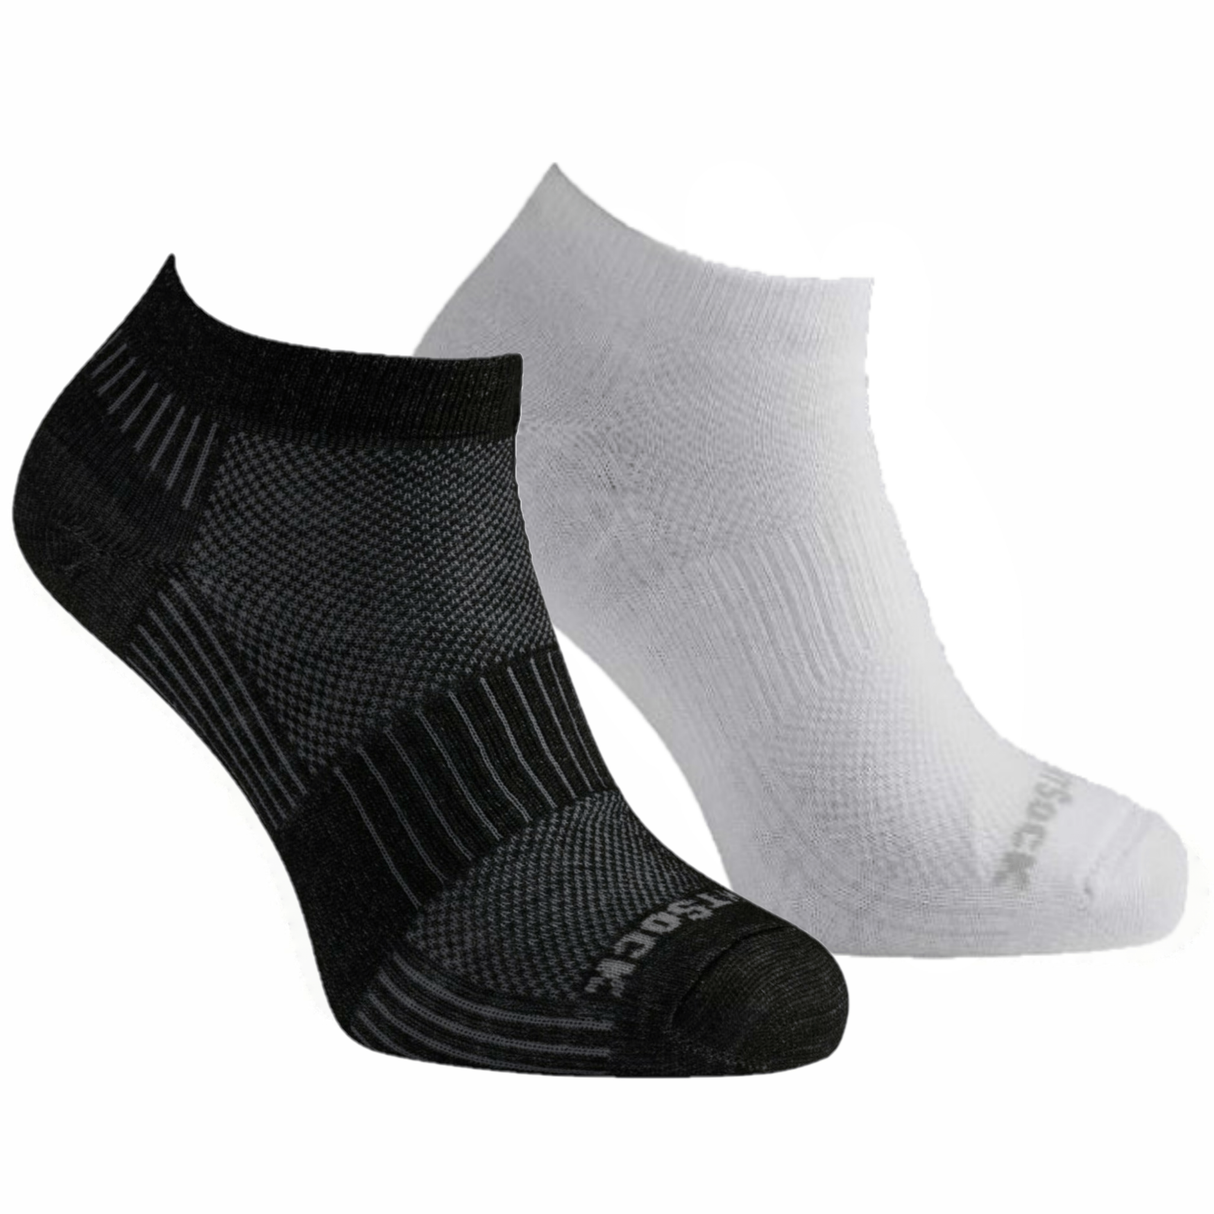 Wrightsock Double-Layer Coolmesh II Lightweight Lo Socks  -  Small / Black/White / 2-Pair Pack